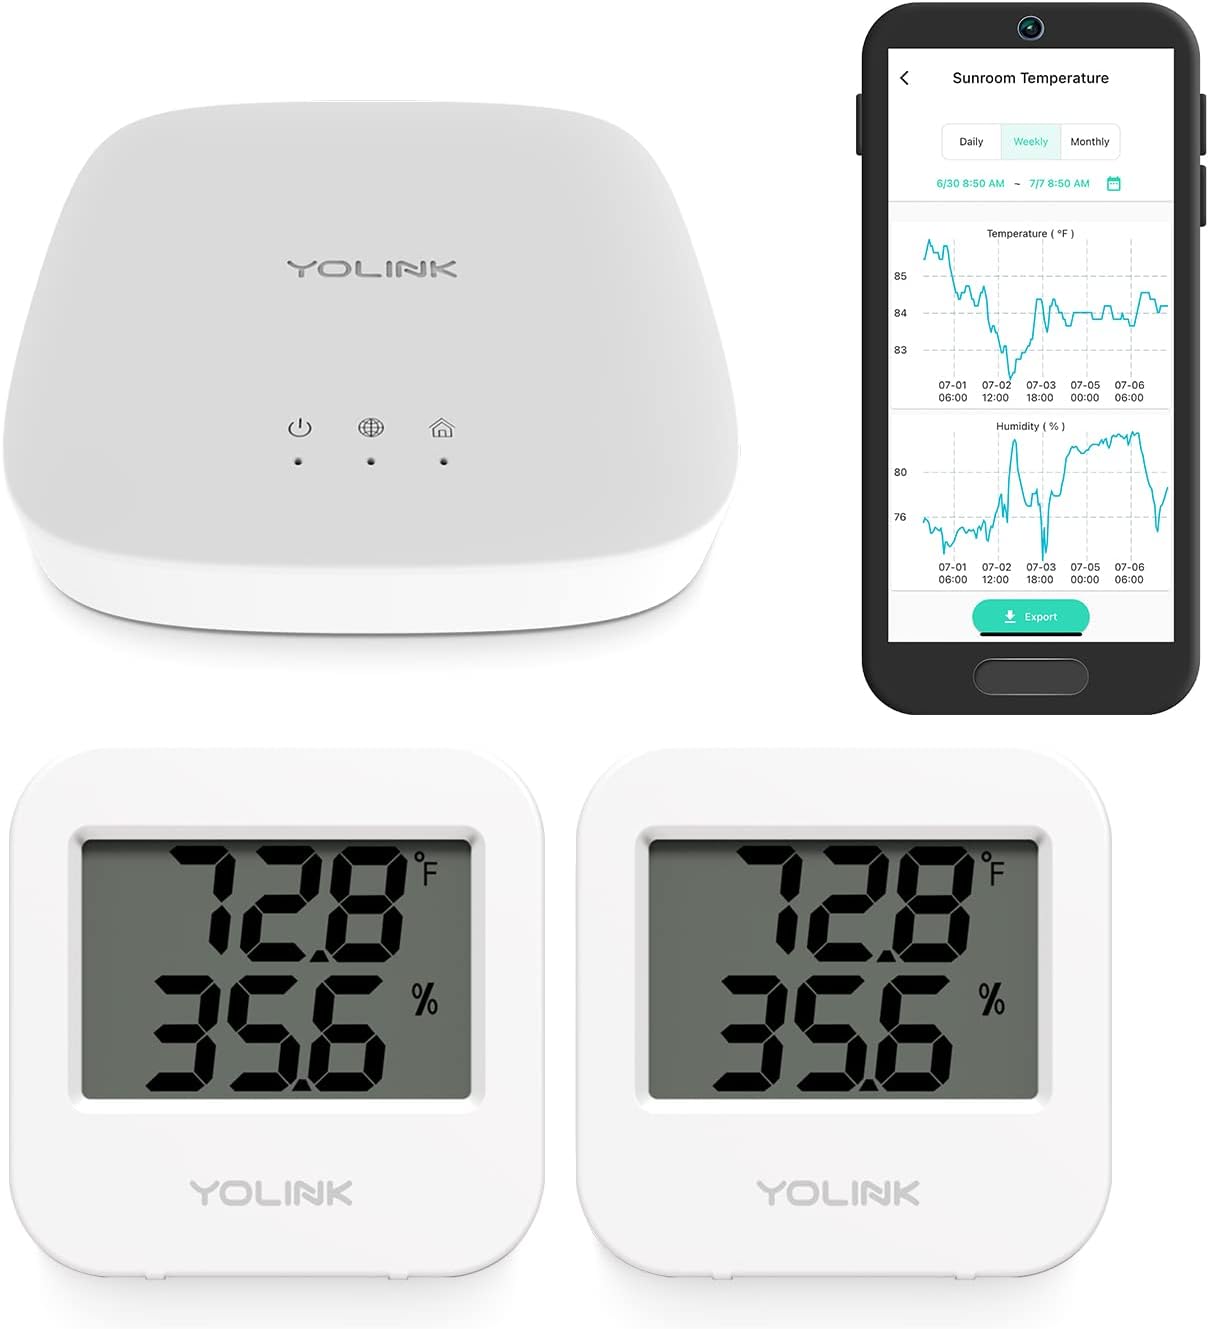 YoLink Smart Wireless Temperature/Humidity Sensor Wide Range for Freezer Fridge Monitoring Pet Cage/Tank Monitoring, App Alerts, Text/SMS, Email Alerts, Works with Alexa IFTTT, 2 Pack - Hub Included